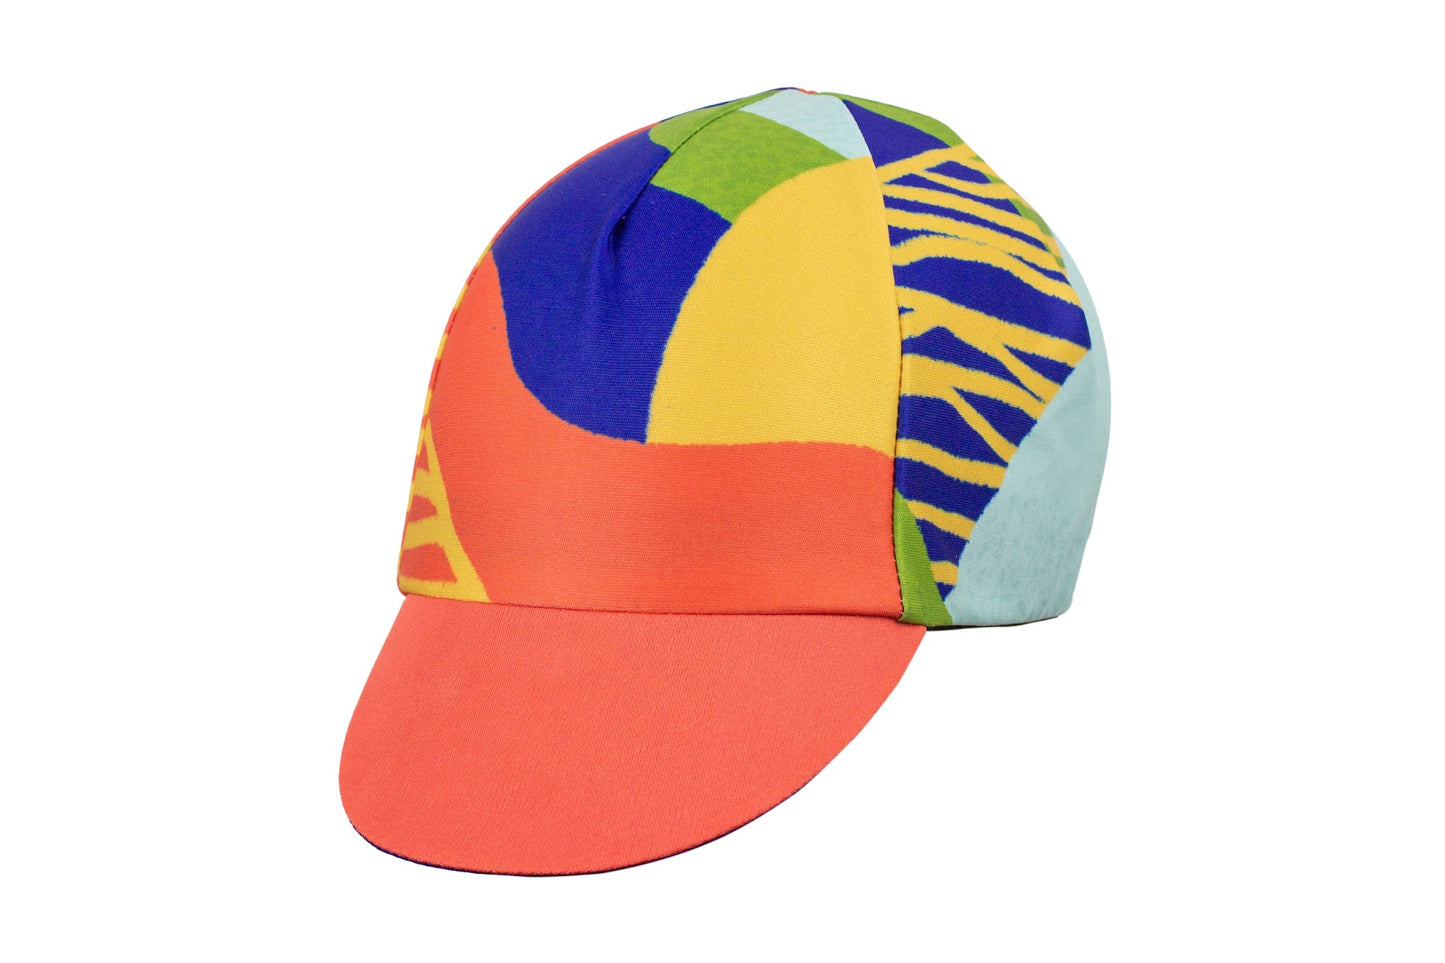 GWxMTH “The Great Outdoors” 4-Panel Cycling cap